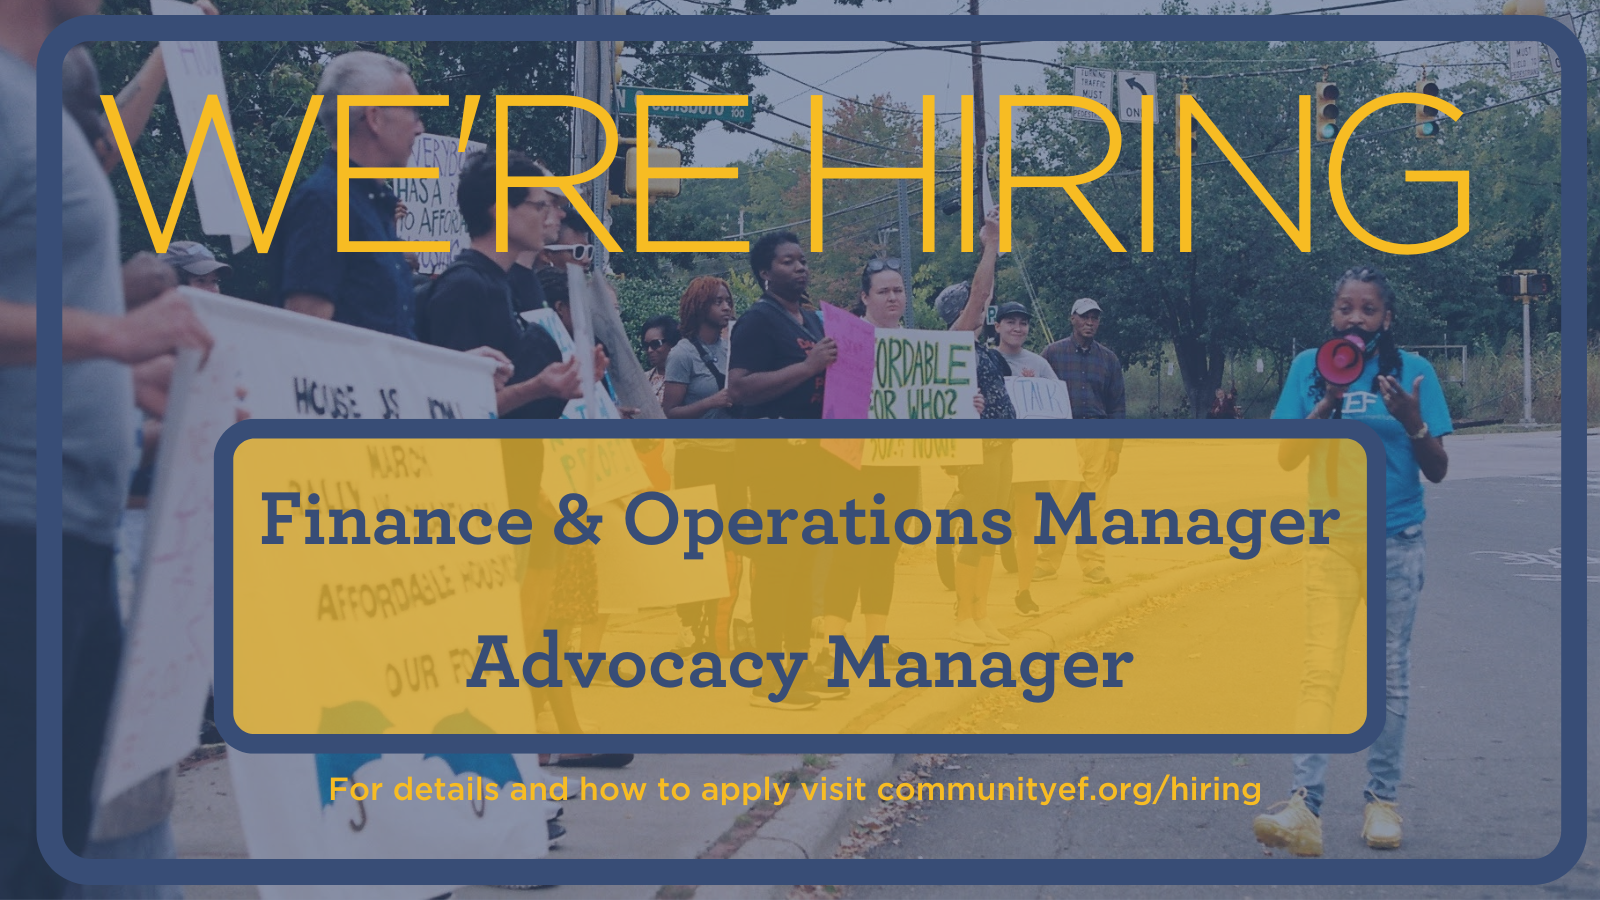 We're Hiring
Finance & Operations Manager
Advocacy Manager
For details and how to apply visit communityef.org/hiring